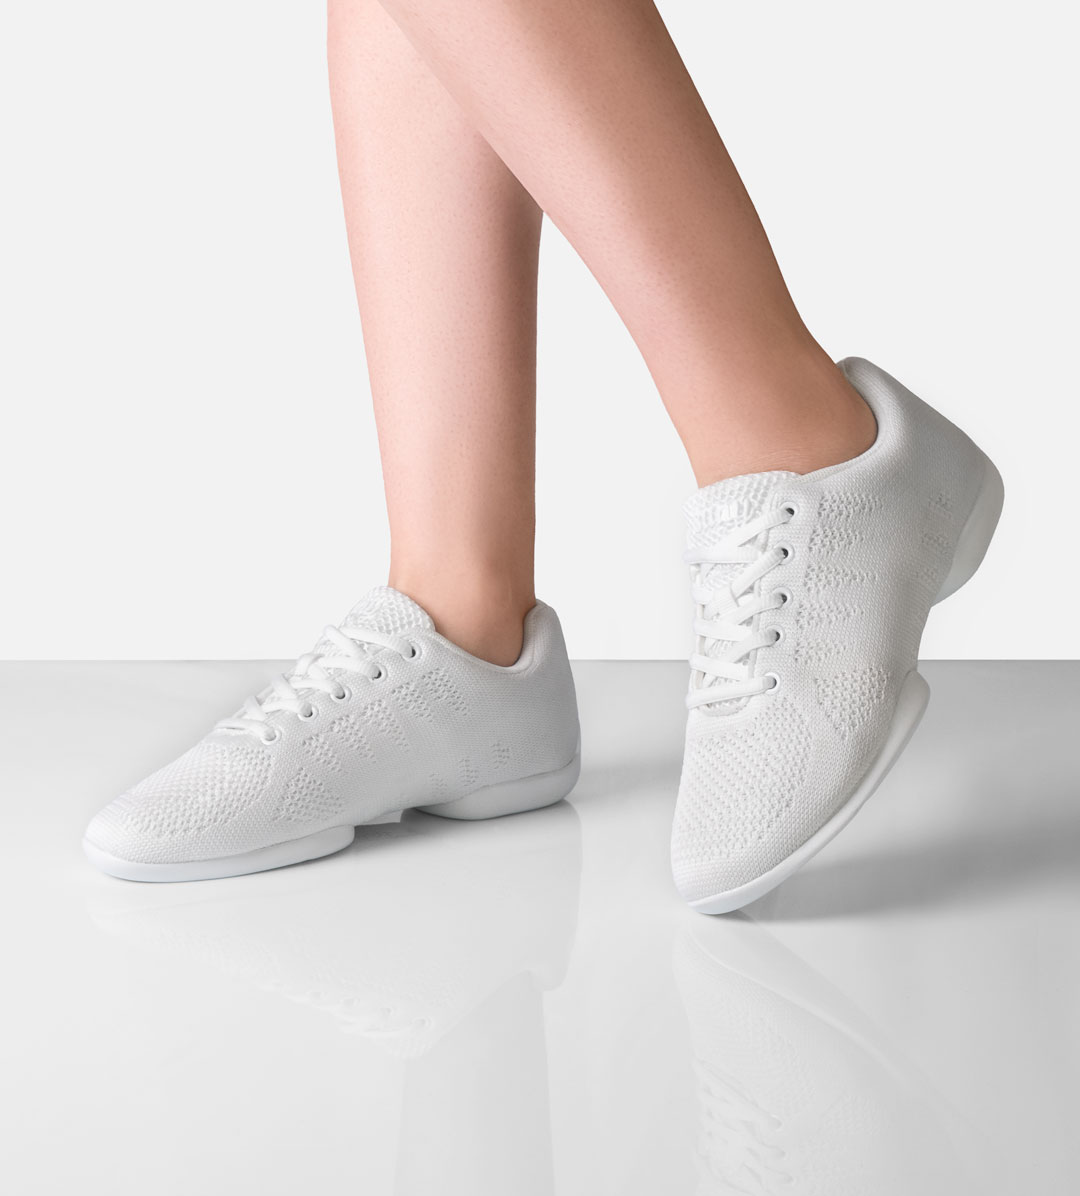 White women's sneakers made of fine knitting material by Suny by Anna Kern, item number 160, split sole, ideal for dancing on all floors.